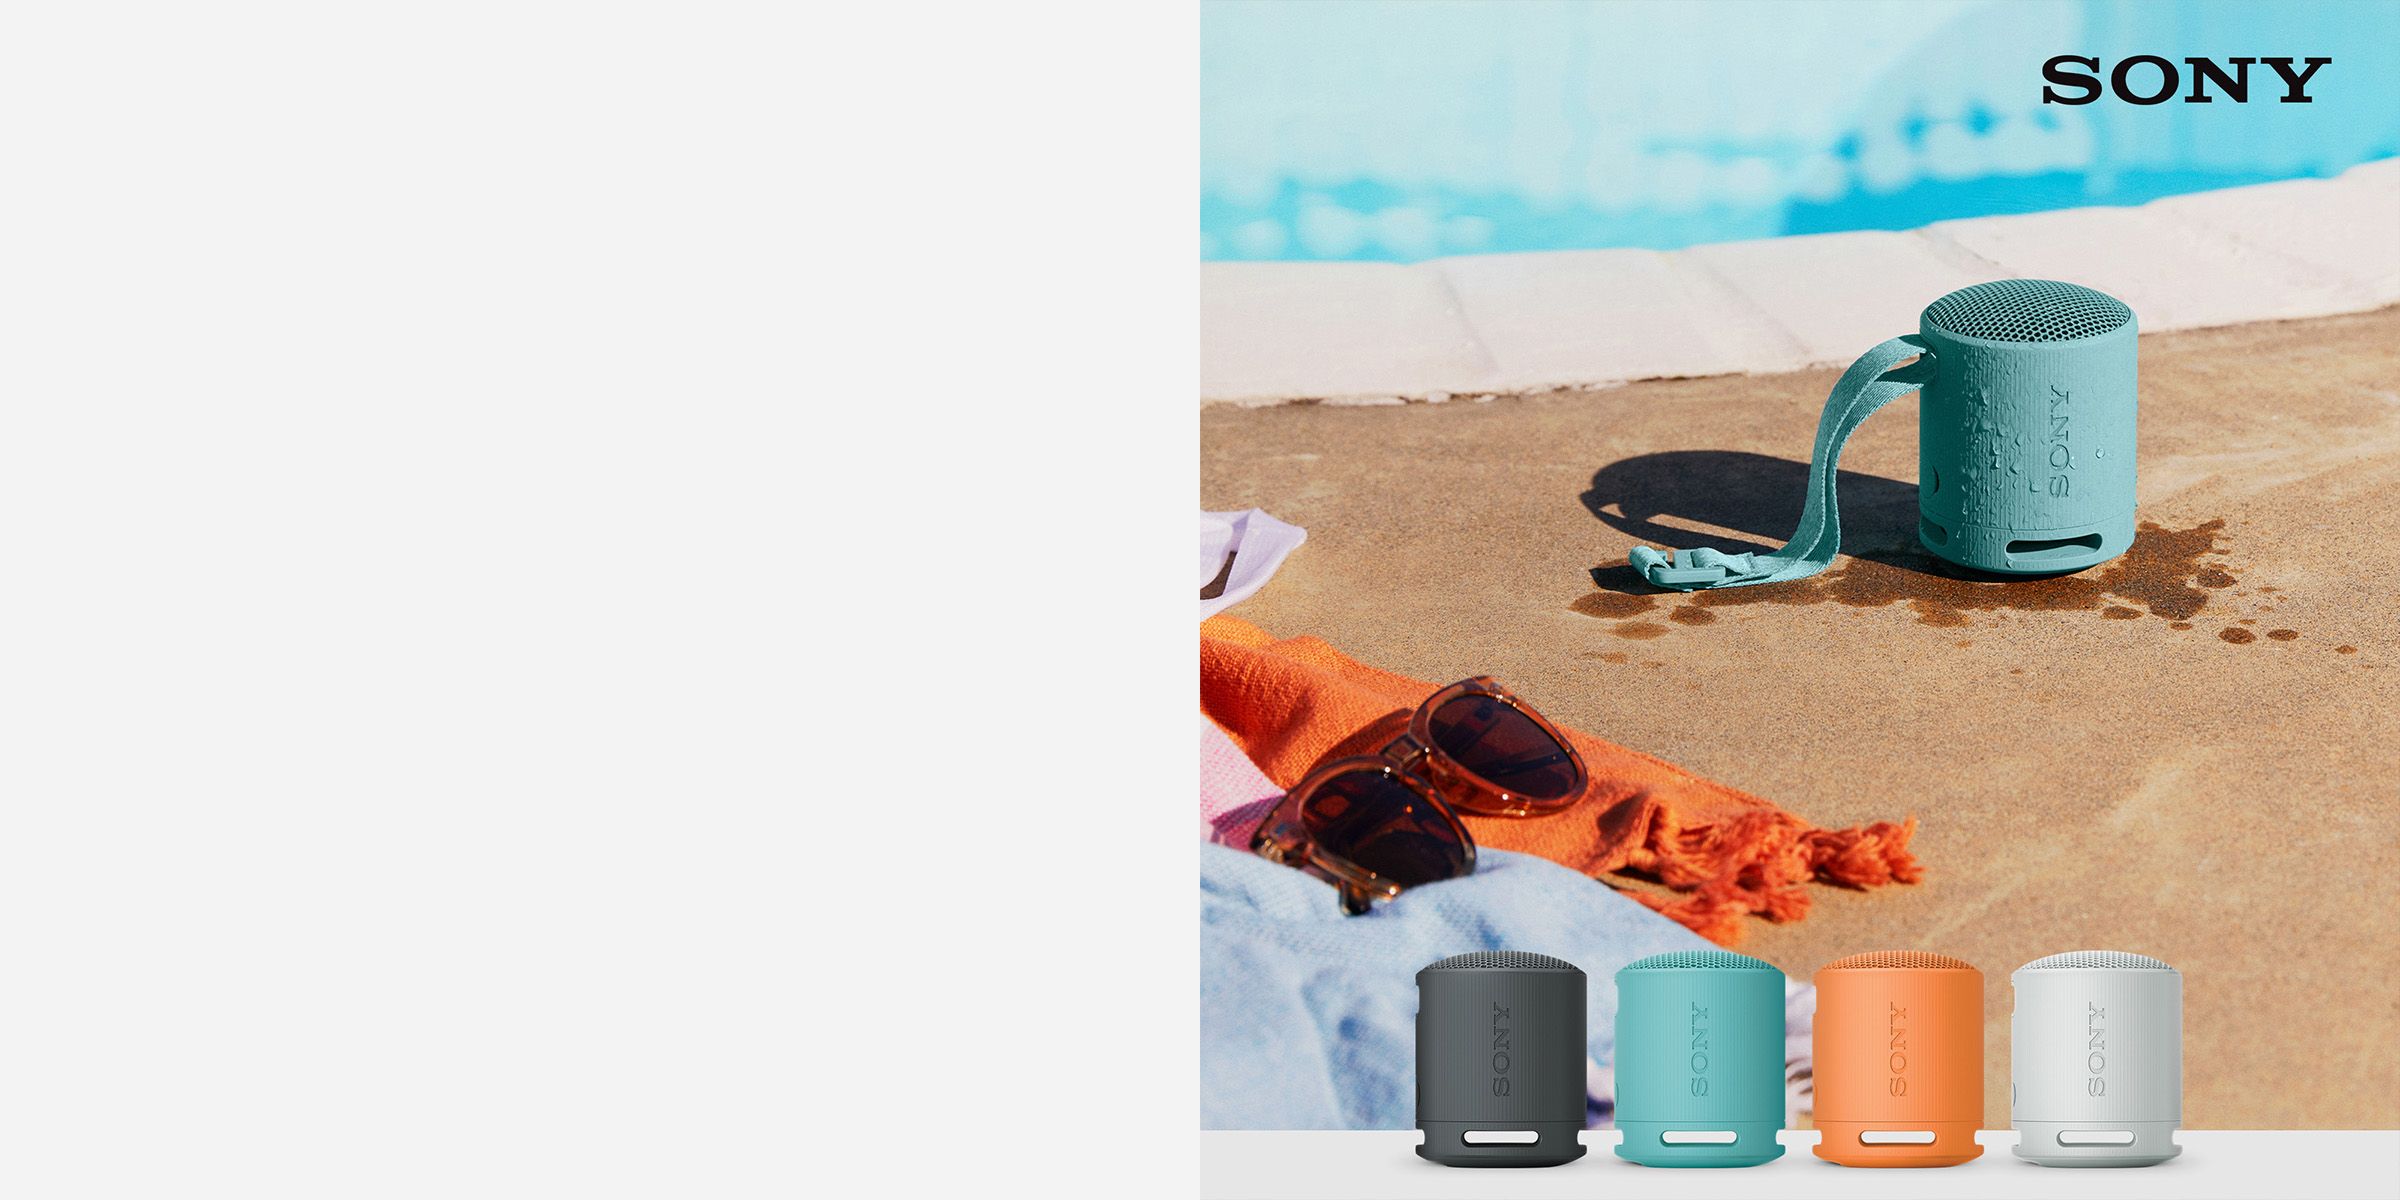 Sony speaker next to a pool, wet, showing water resistance